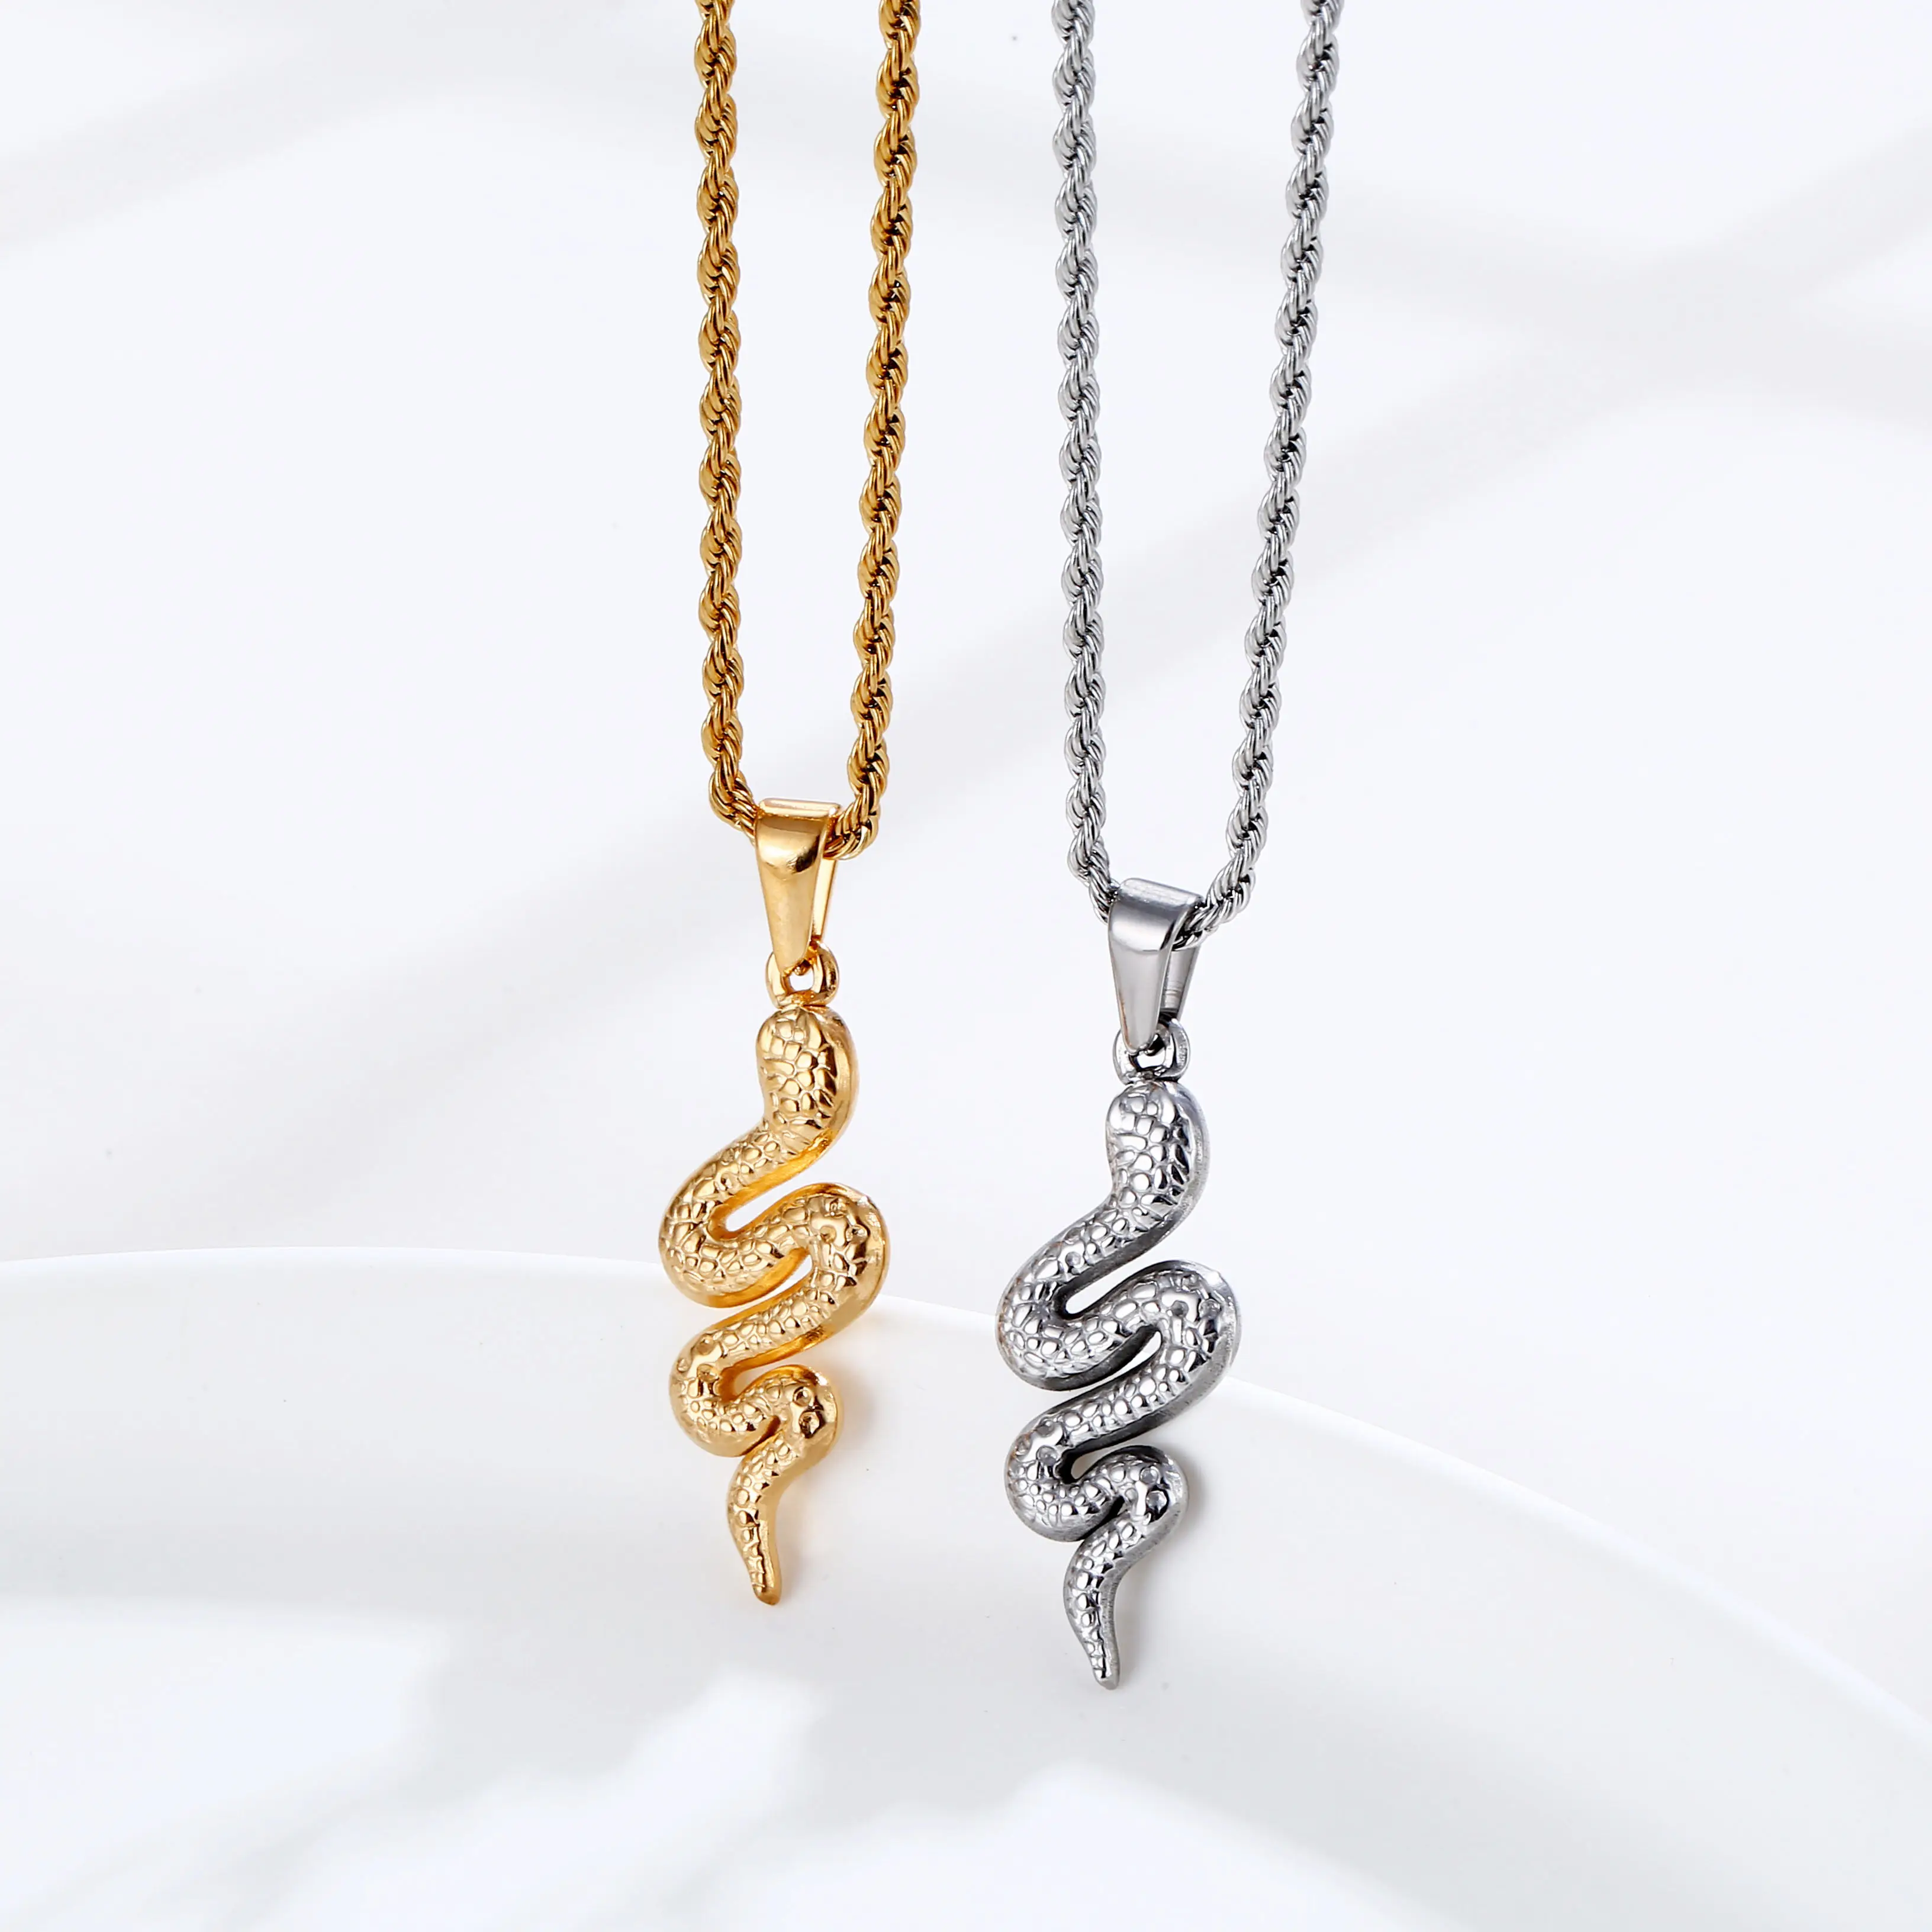 Fashion 18k Gold Filled Plated Statement Chain Stainless Steel Jewelry Snake Pendant Necklaces Animal Serpent Necklace